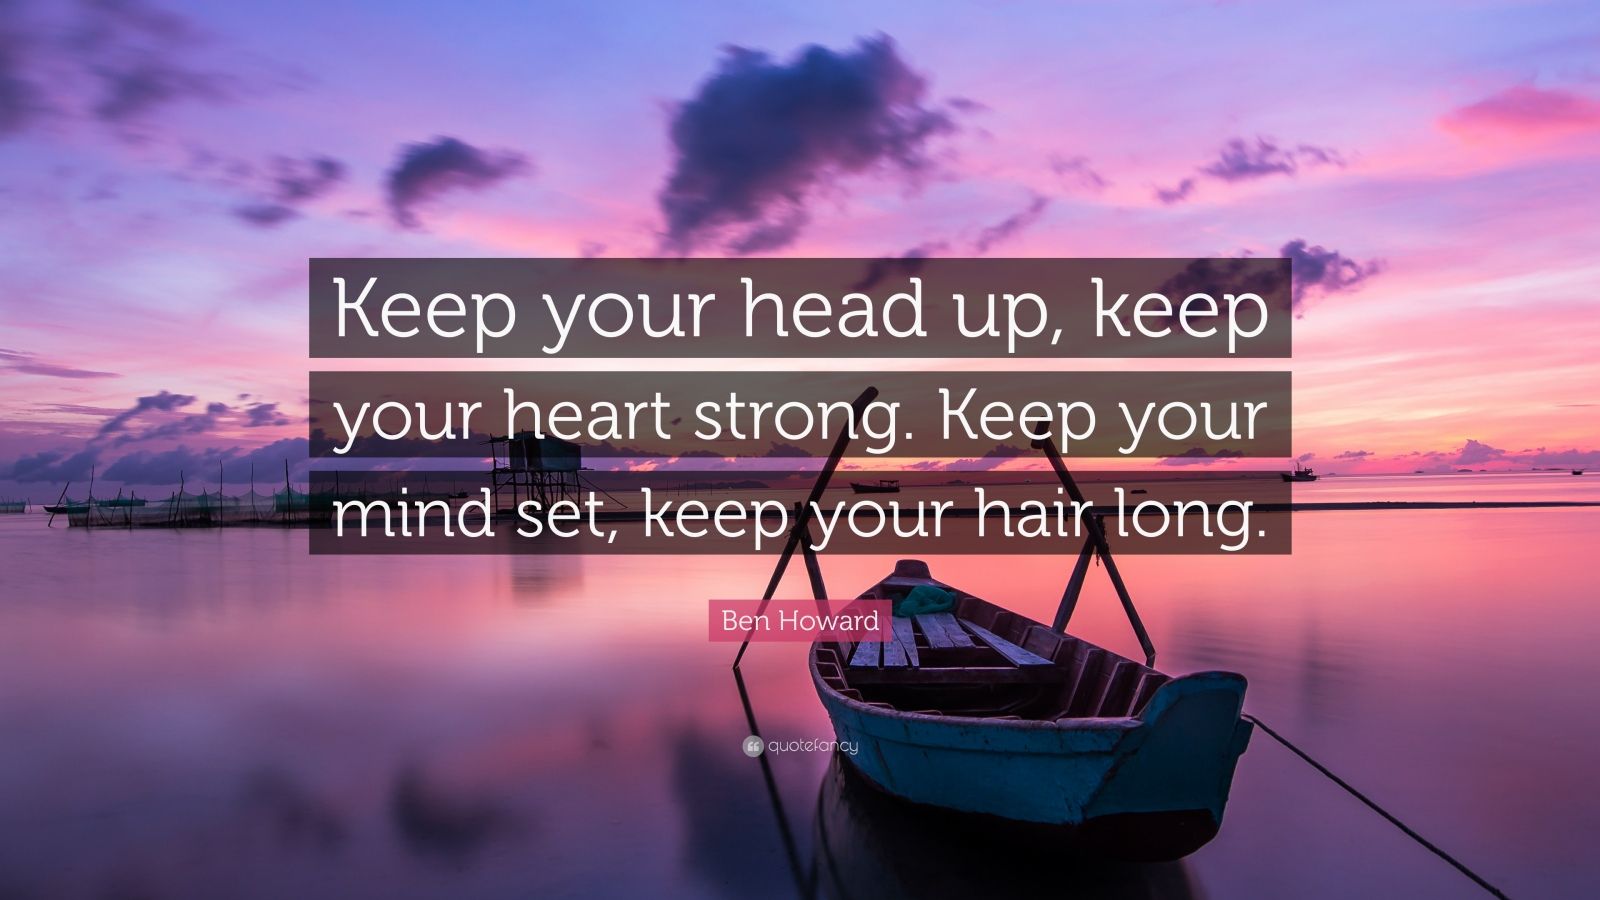 Ben Howard Quote: “Keep your head up, keep your heart strong. Keep your